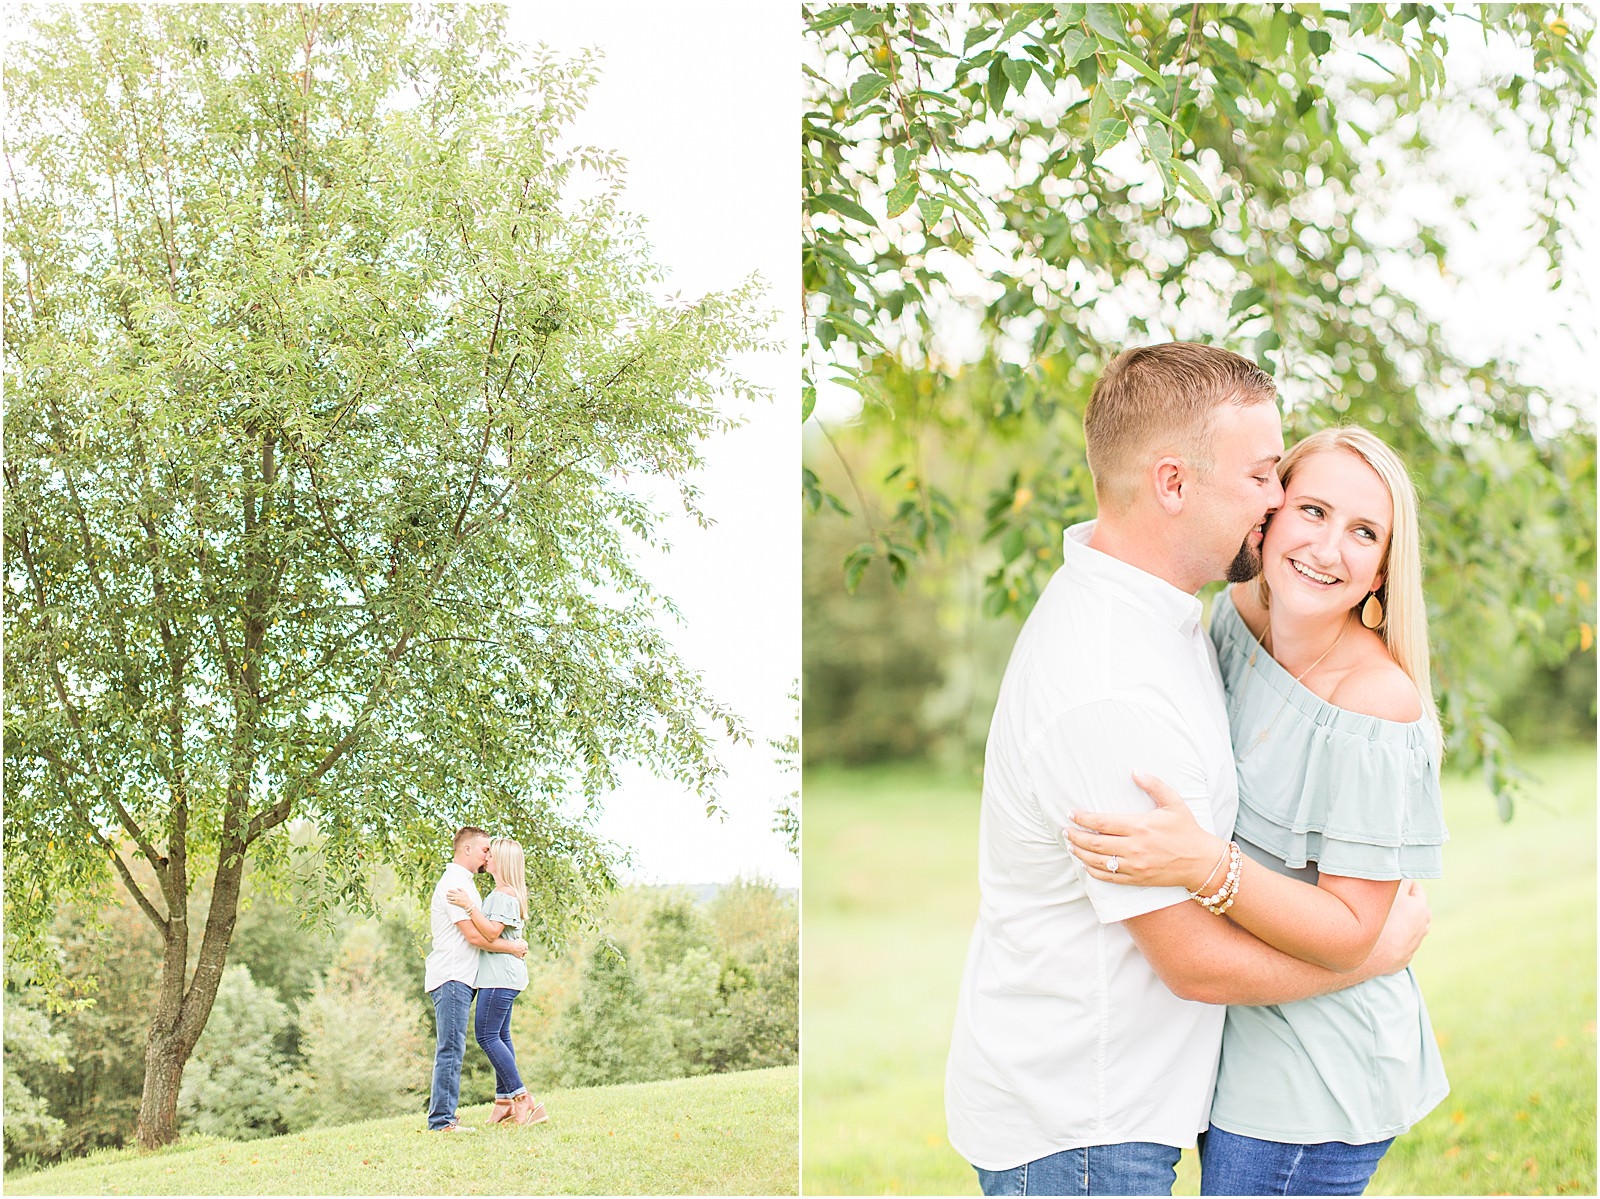 Lauren and Bryce | The Corner House B&ed and Breakfast Engagement Session | Bret and Brandie Photography 005.jpg